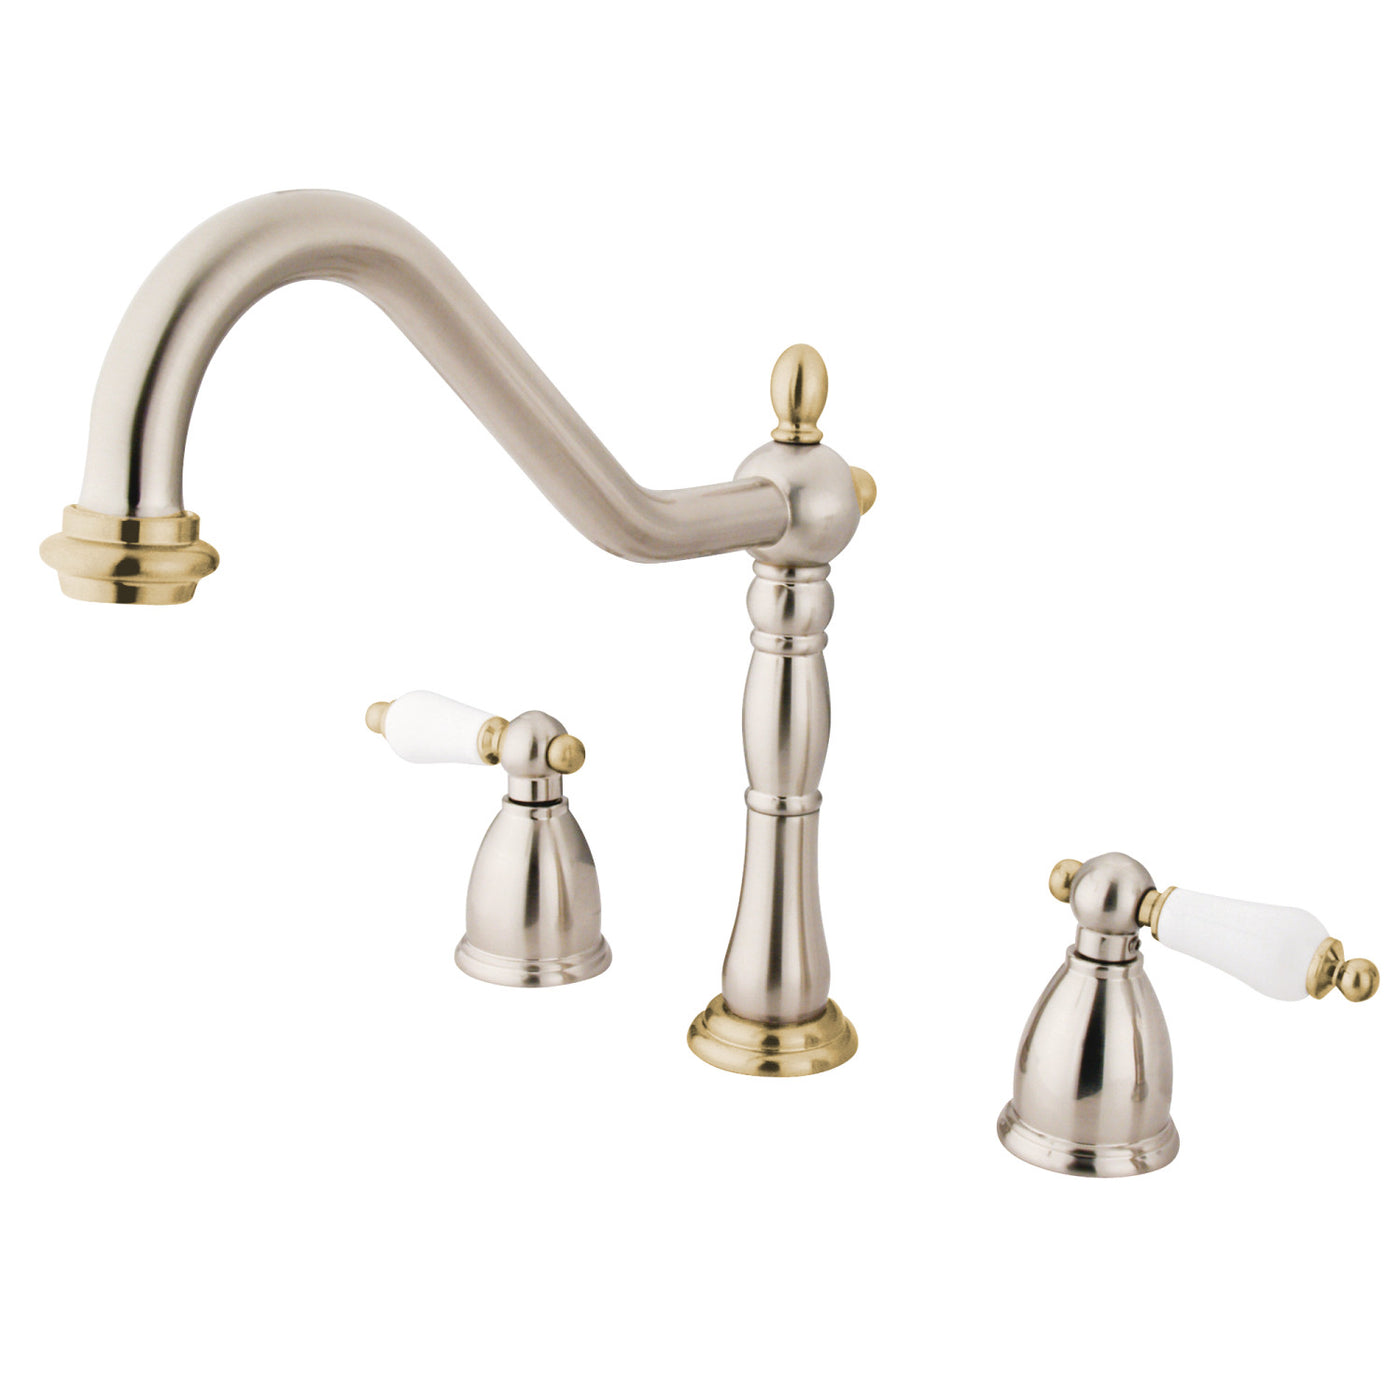 Elements of Design EB1799PLLS Widespread Kitchen Faucet, Brushed Nickel/Polished Brass